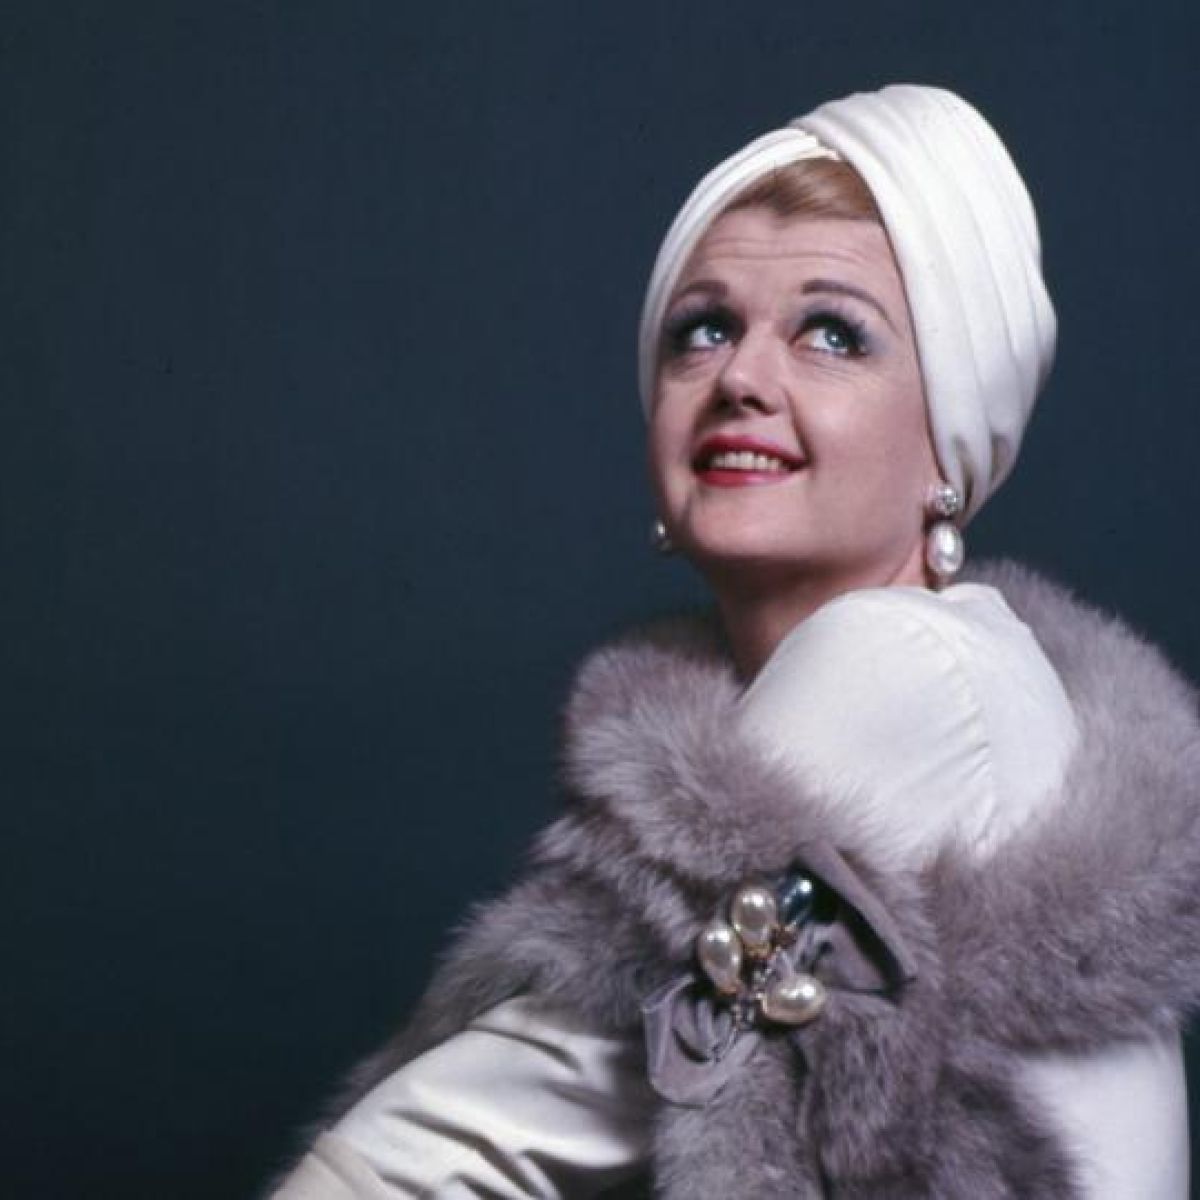 Of angela lansbury pictures An Amazing